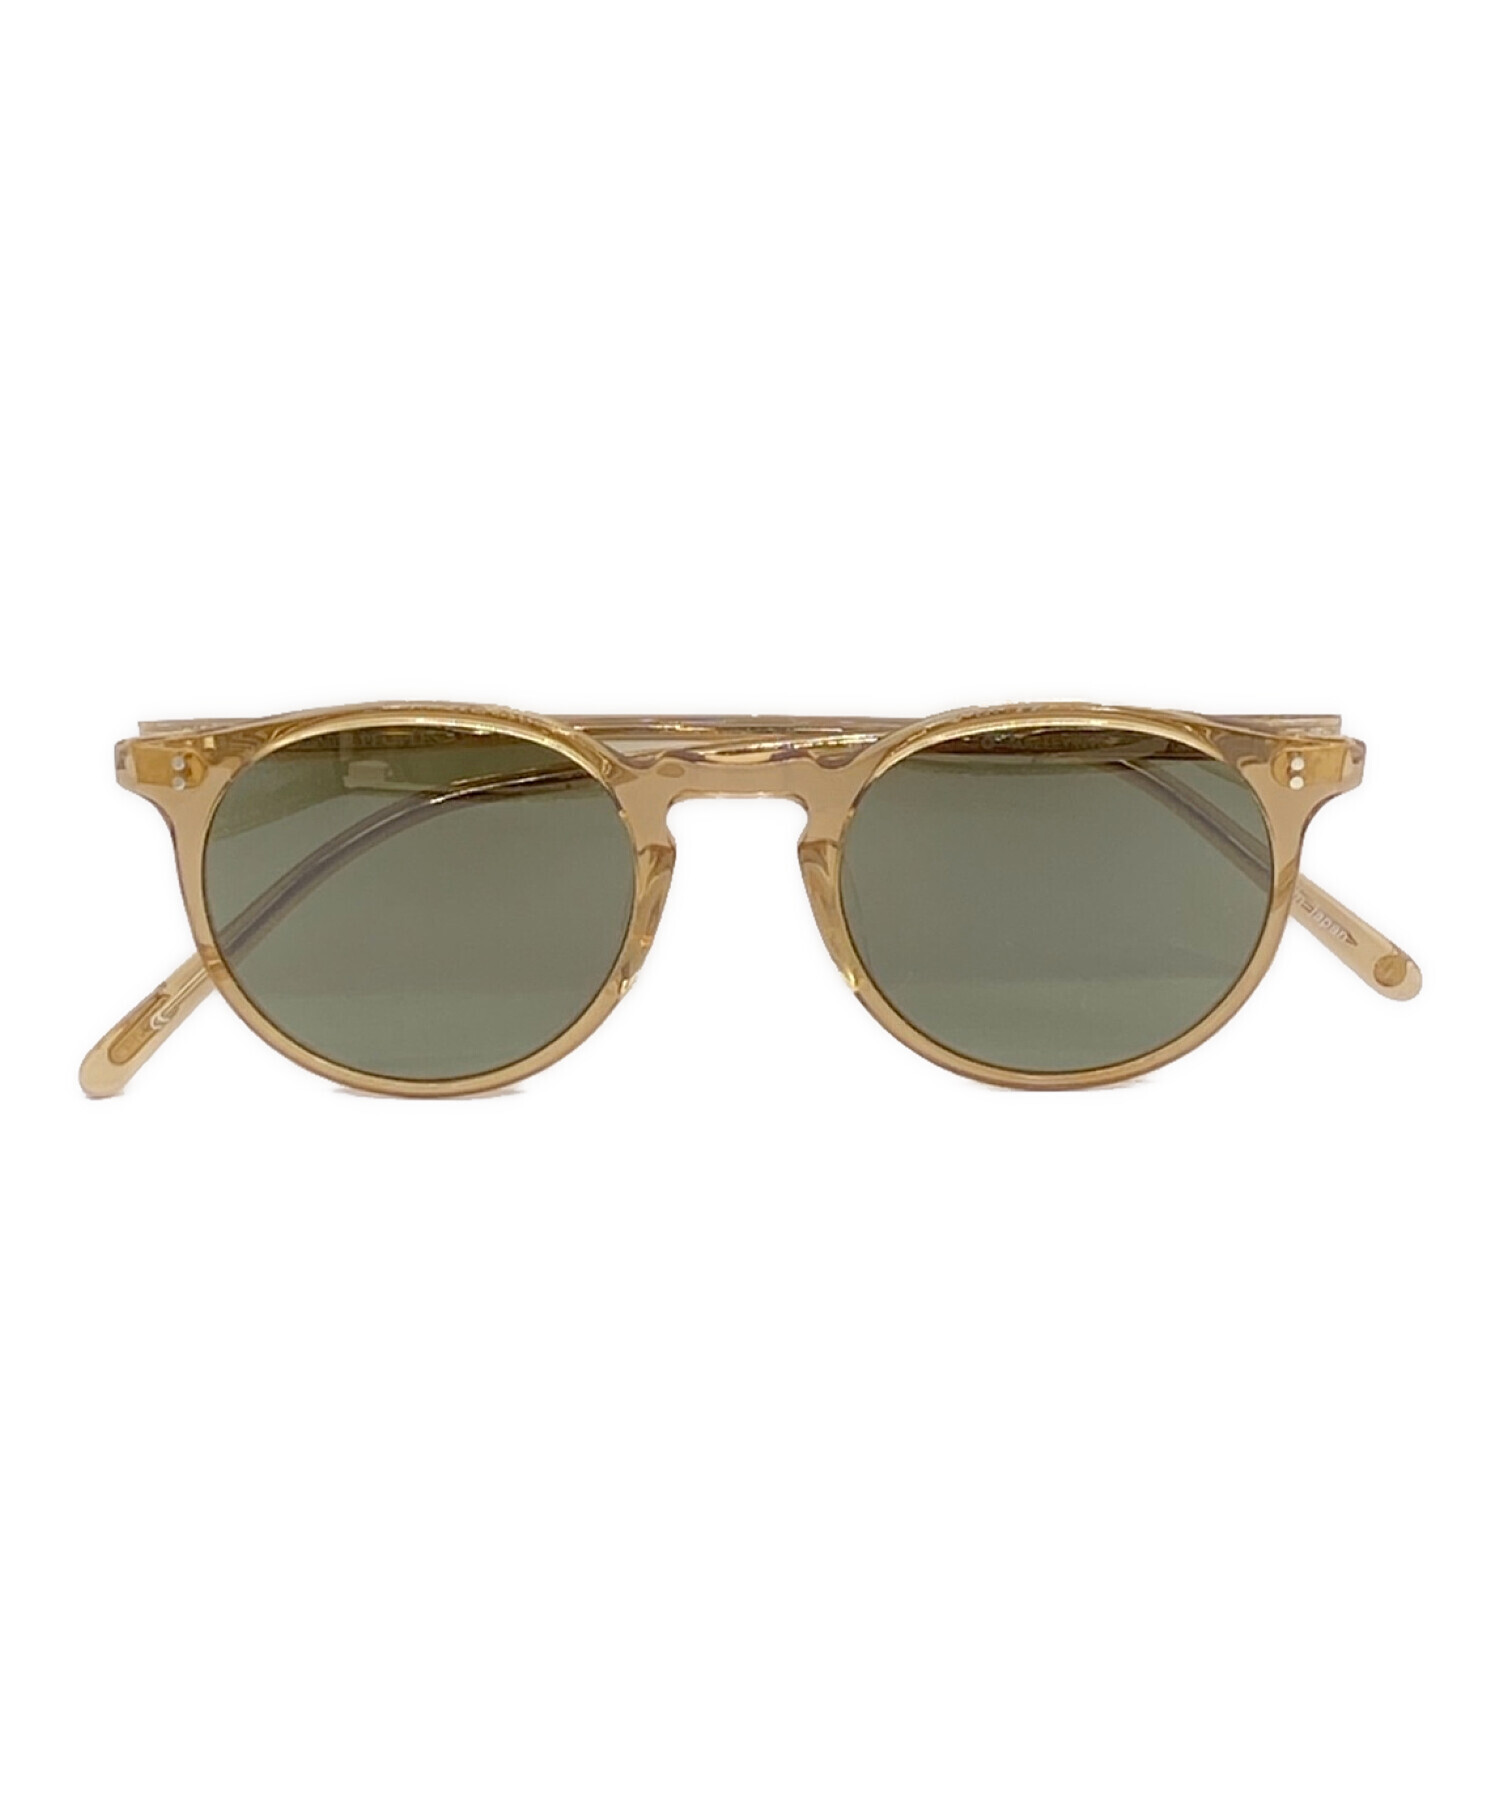 OLIVER PEOPLES×THE ROW (オリバーピープルズ×ザ ロウ) サングラス クリア